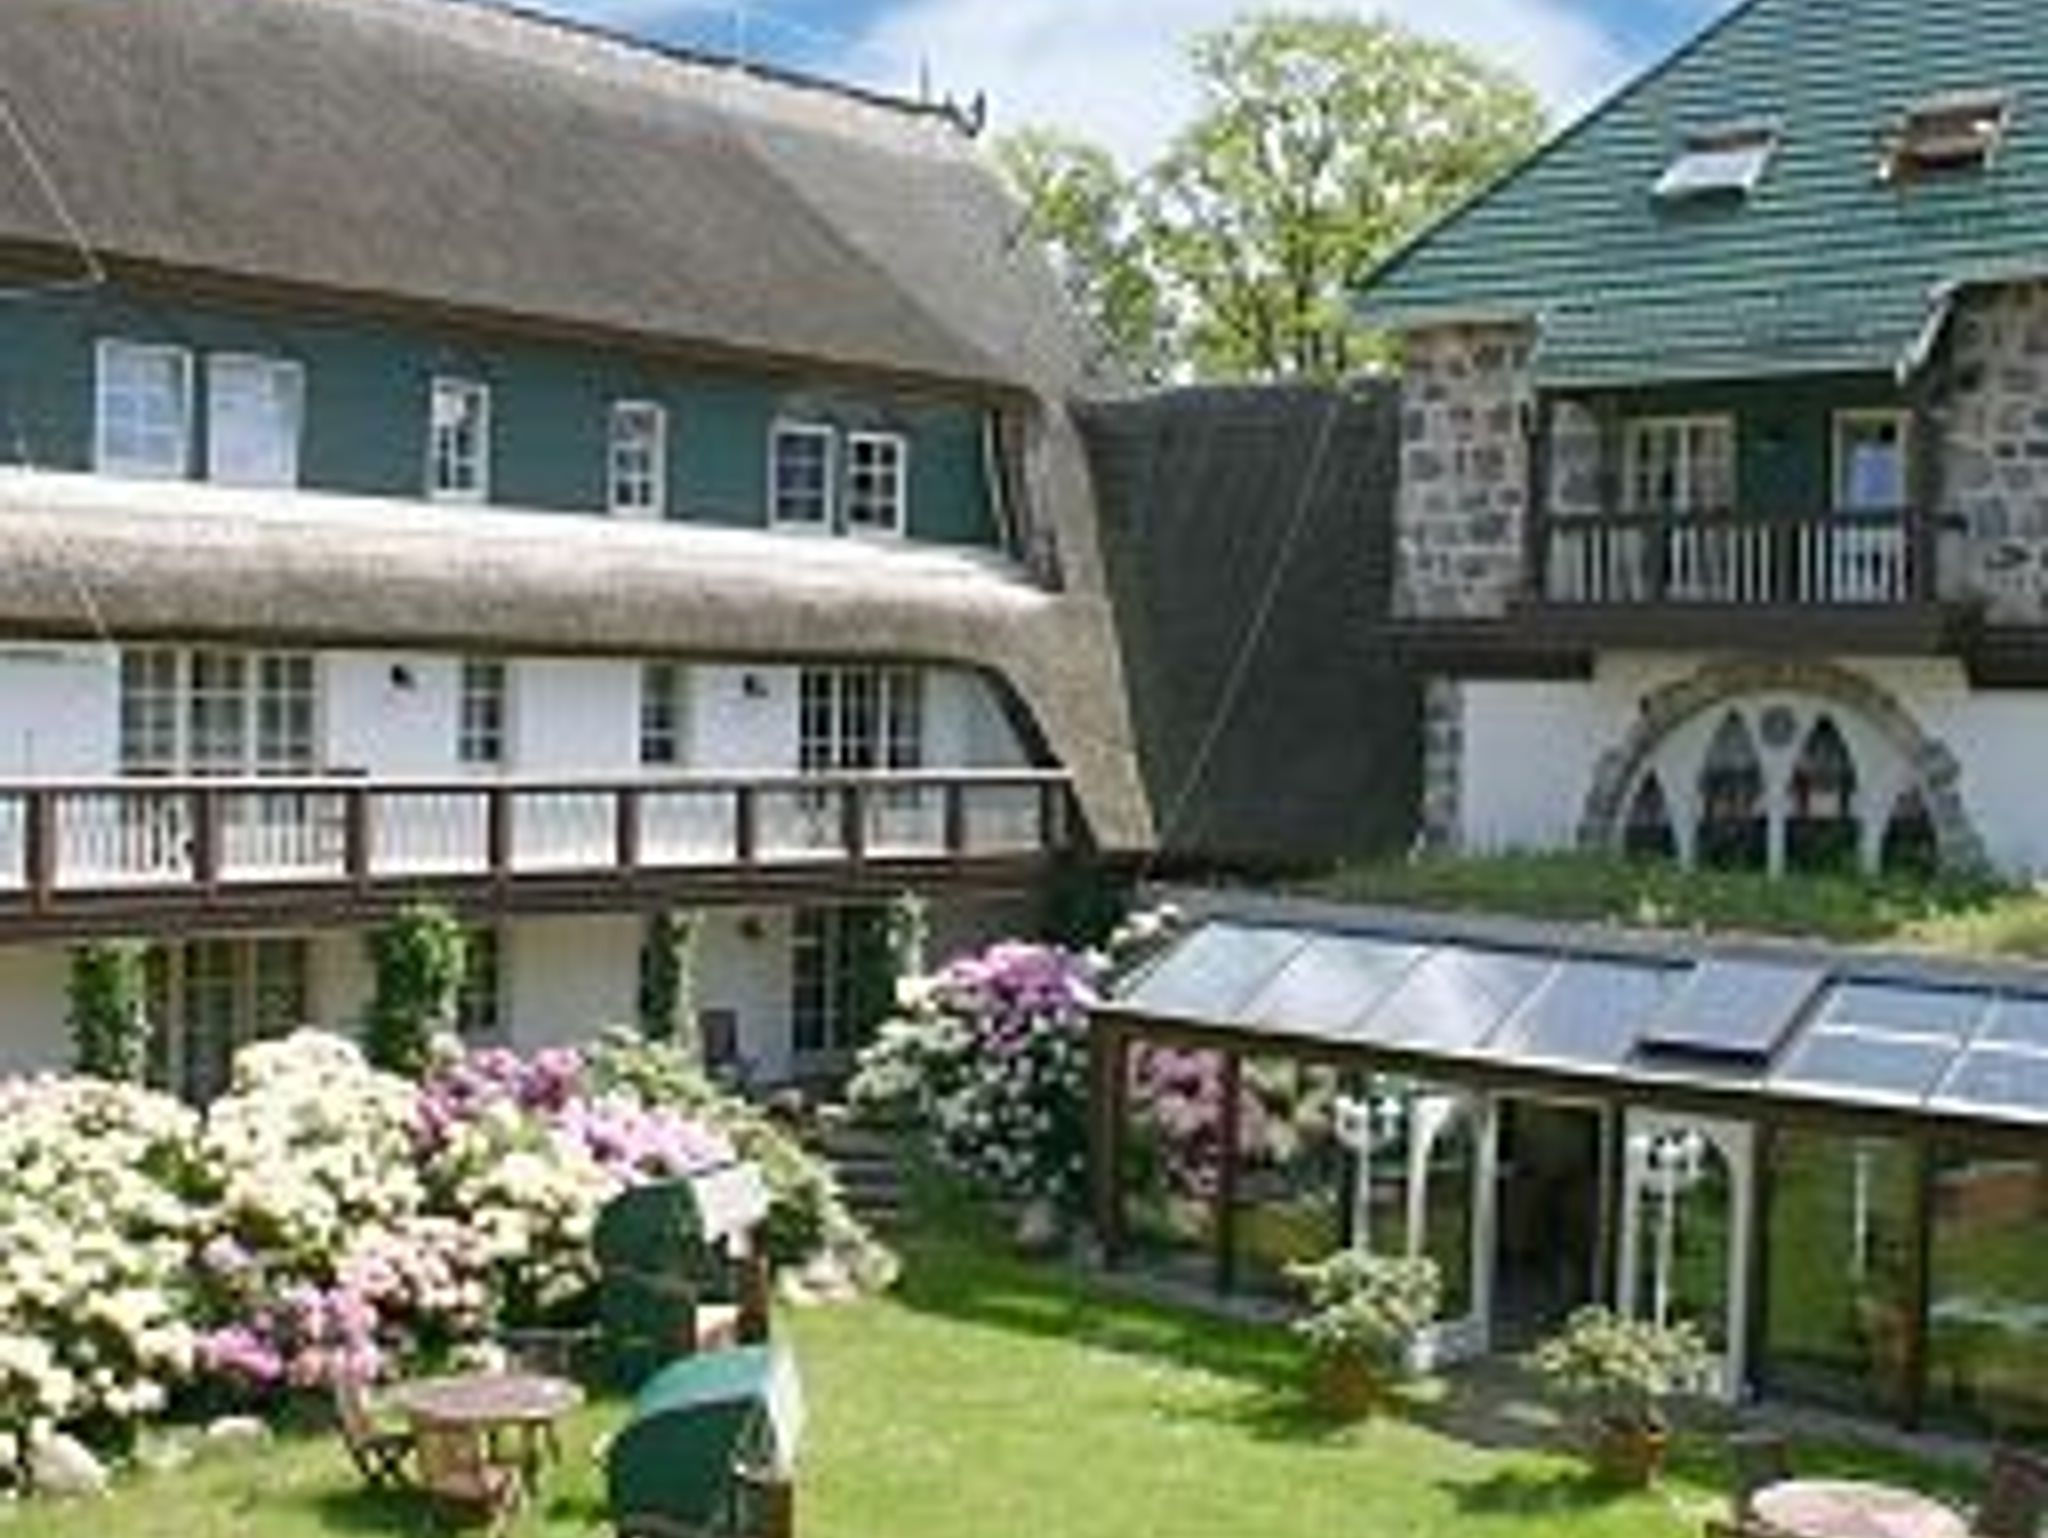 Forsthaus Damerow